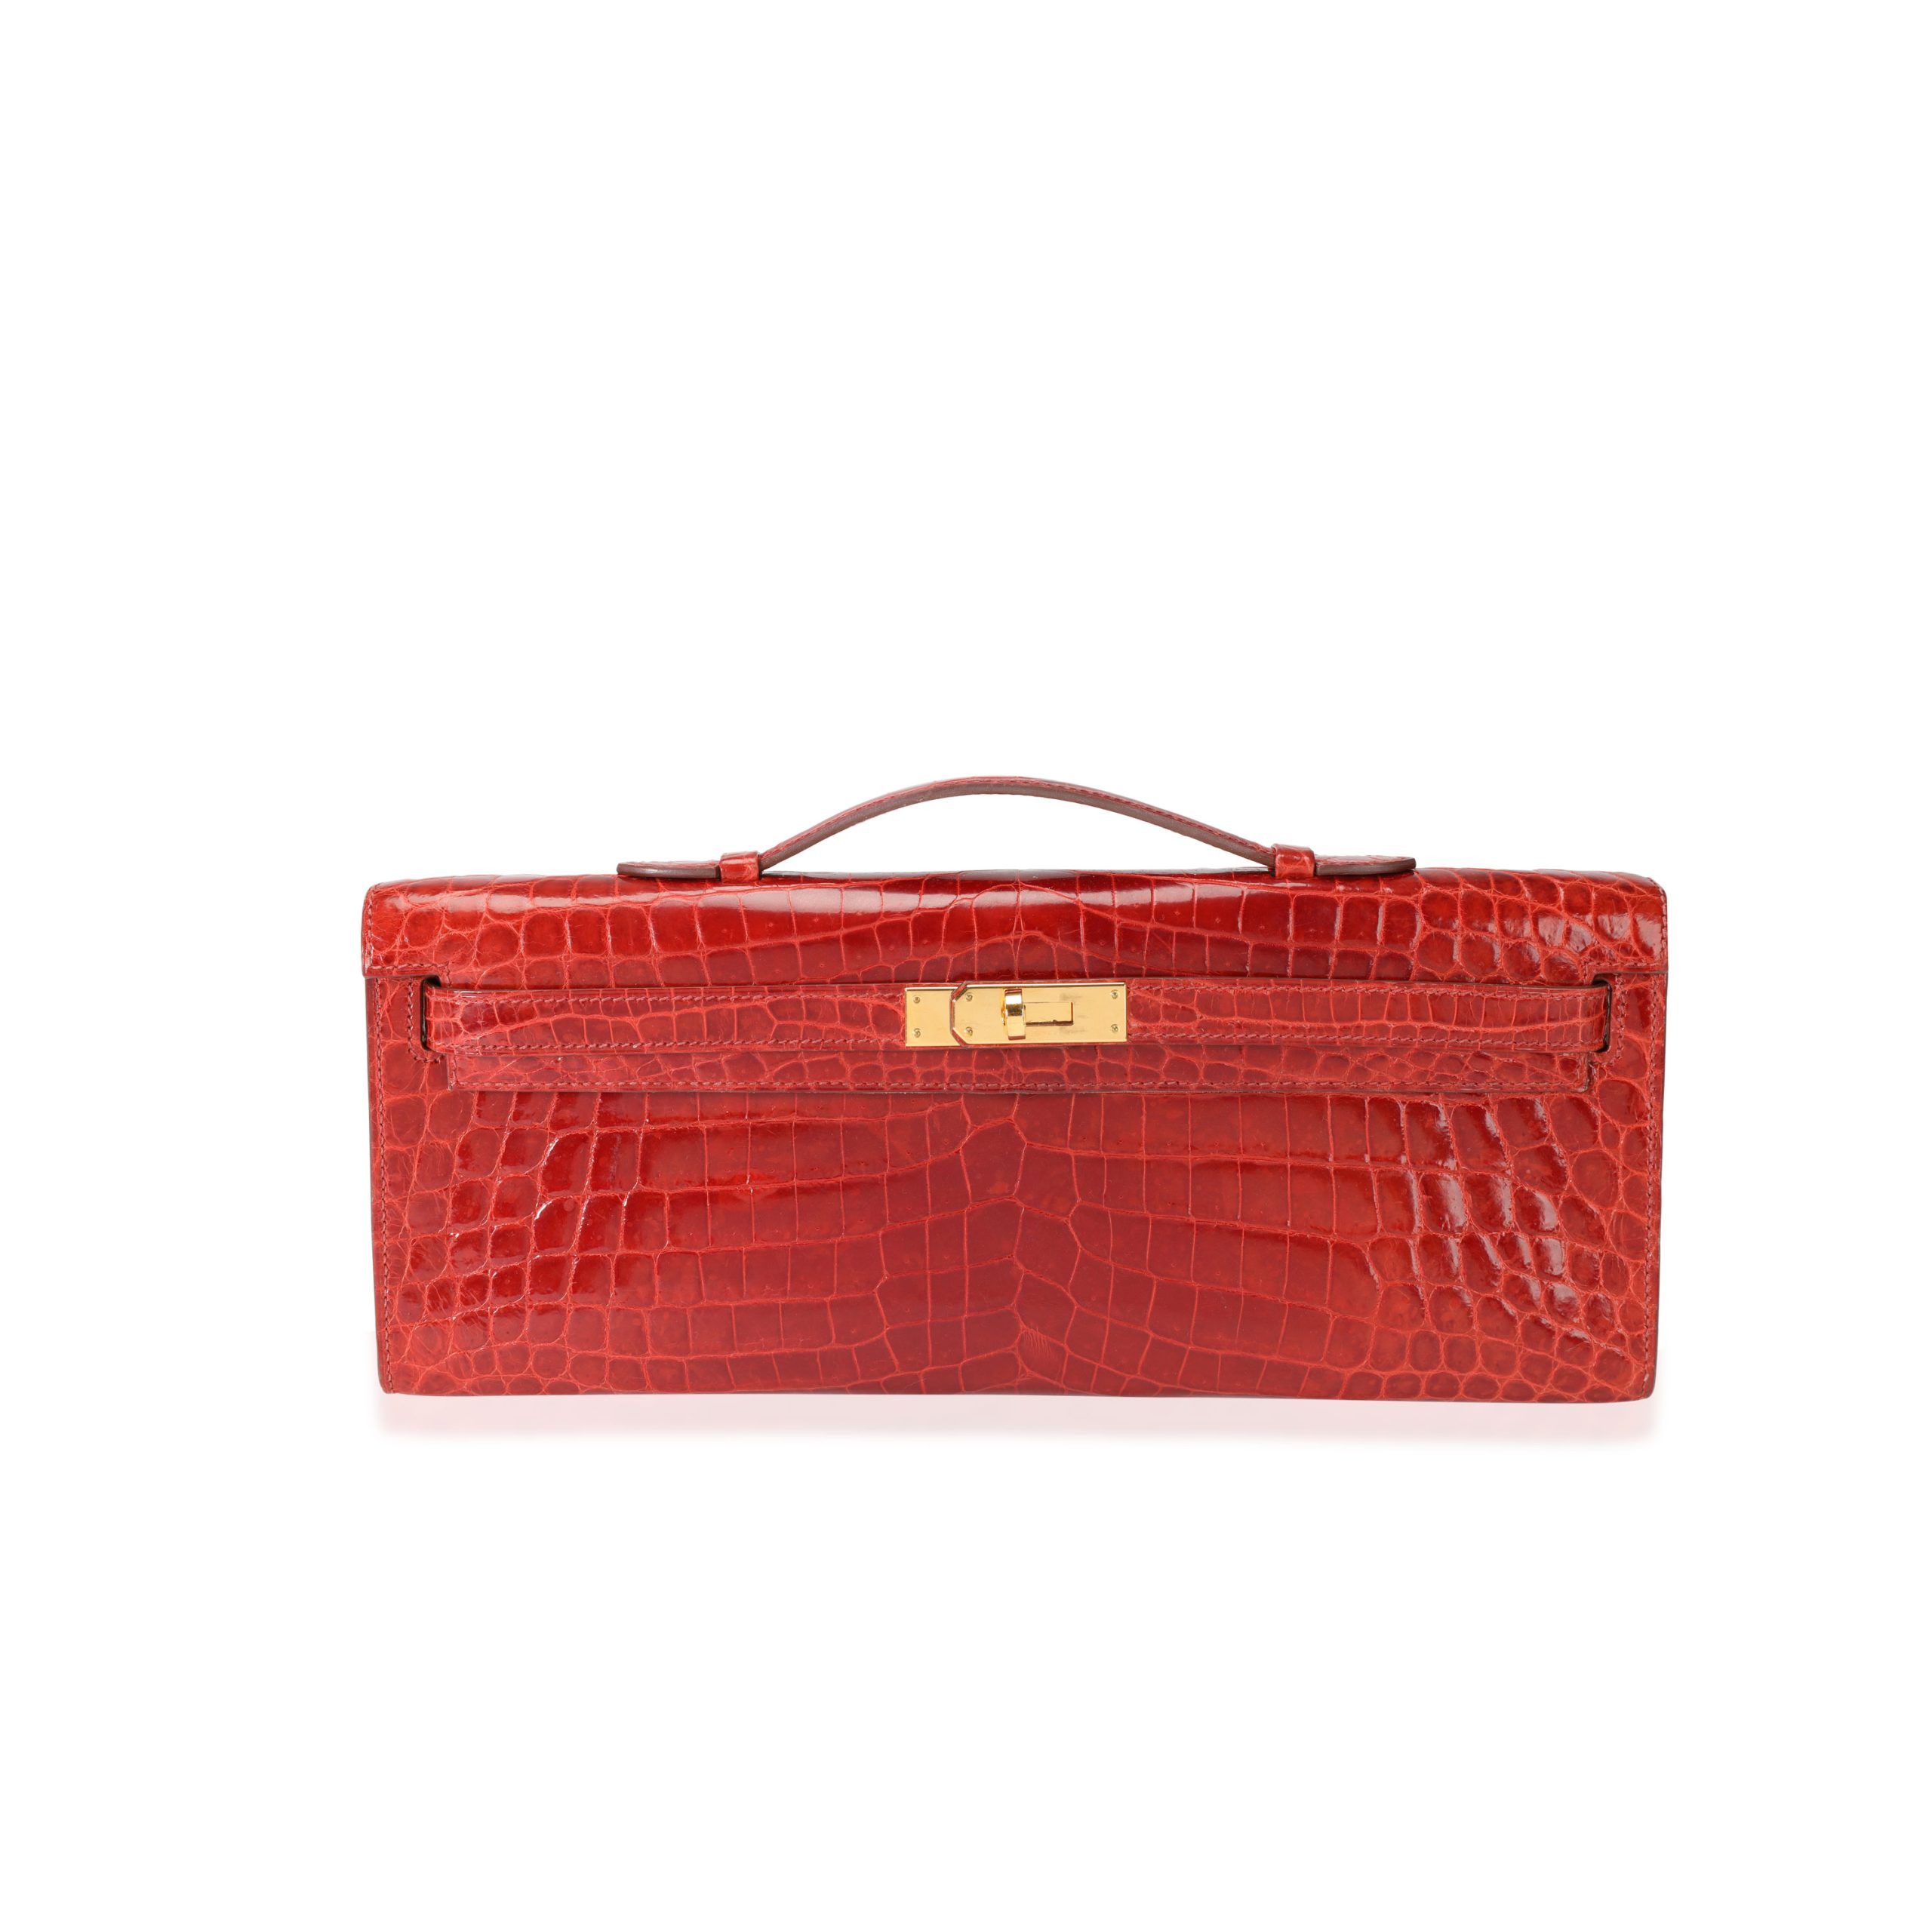 image of Hermes Sanguine Shiny Niloticus Crocodile Kelly Cut Ghw in Red, Women's